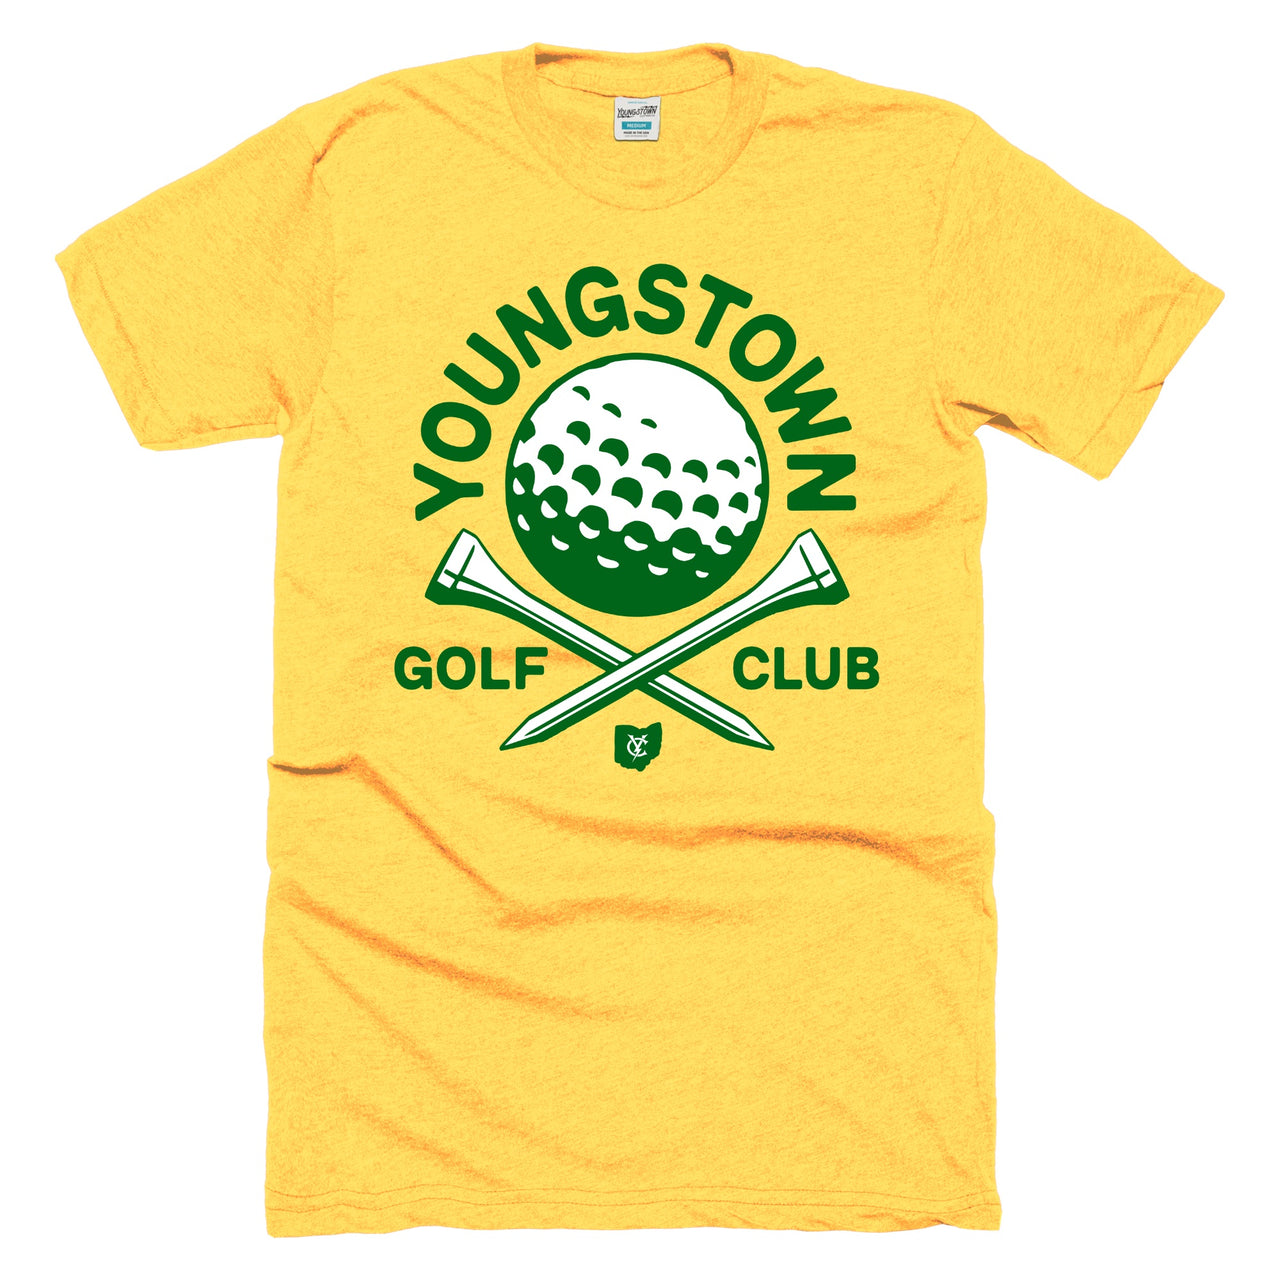 Youngstown Golf Club